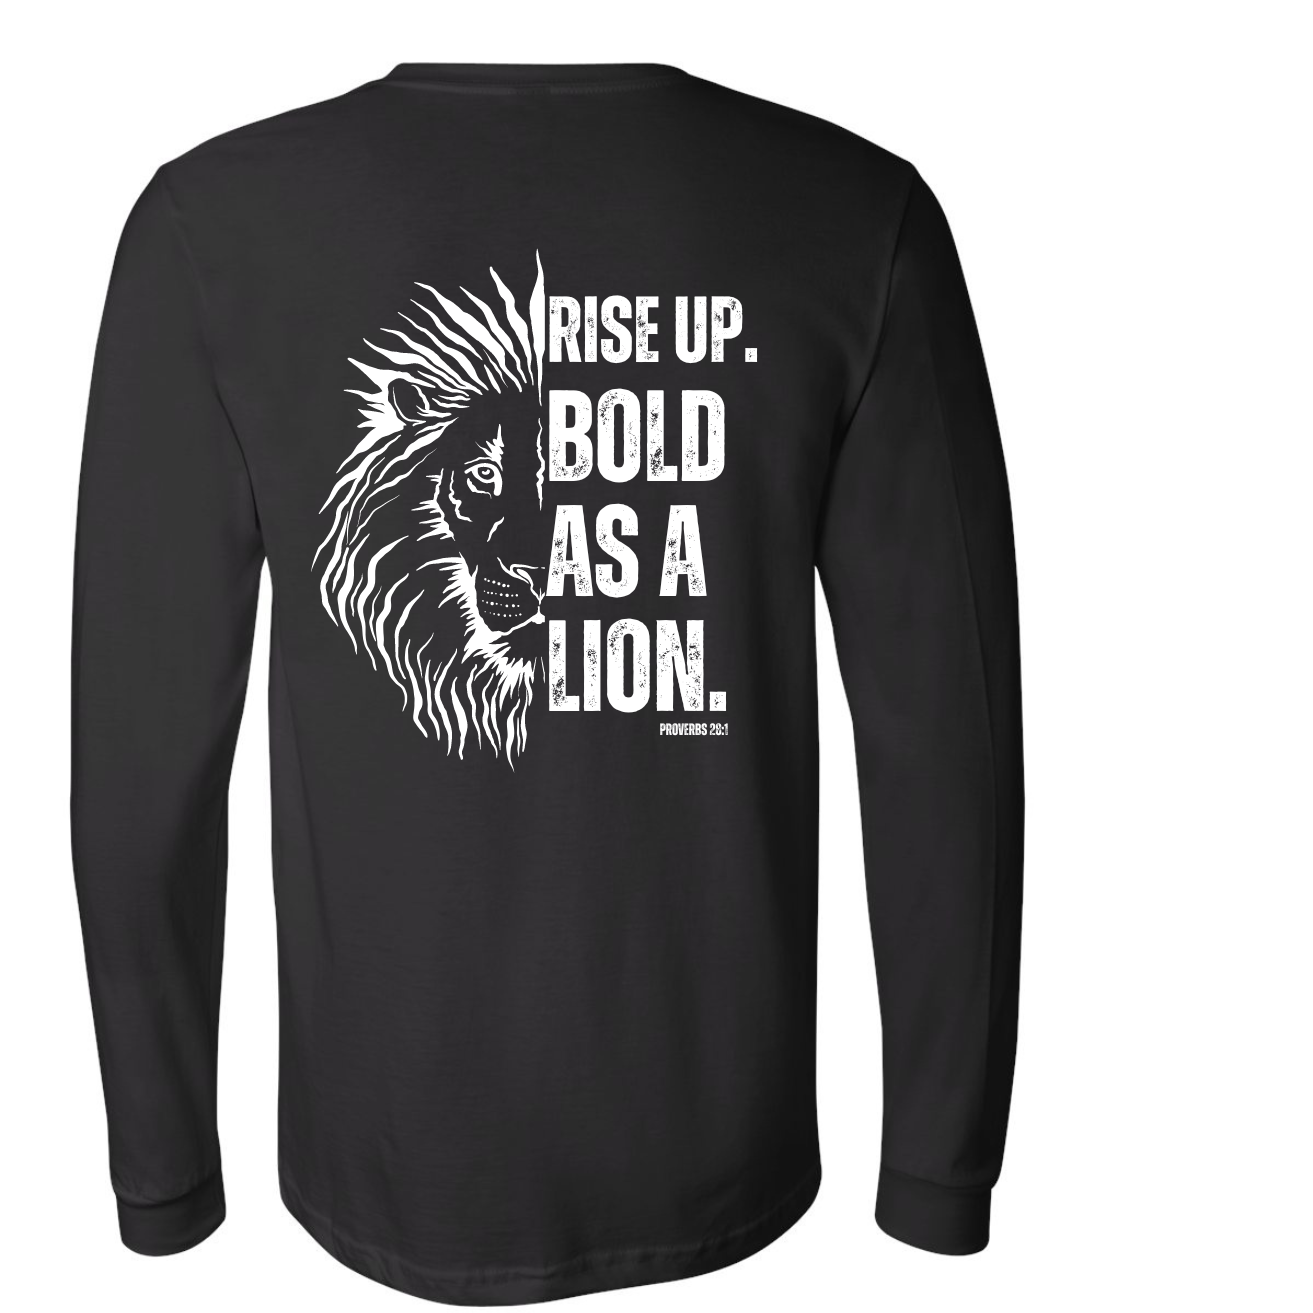 Bold As A Lion / Bold Fitness / Bold Spin